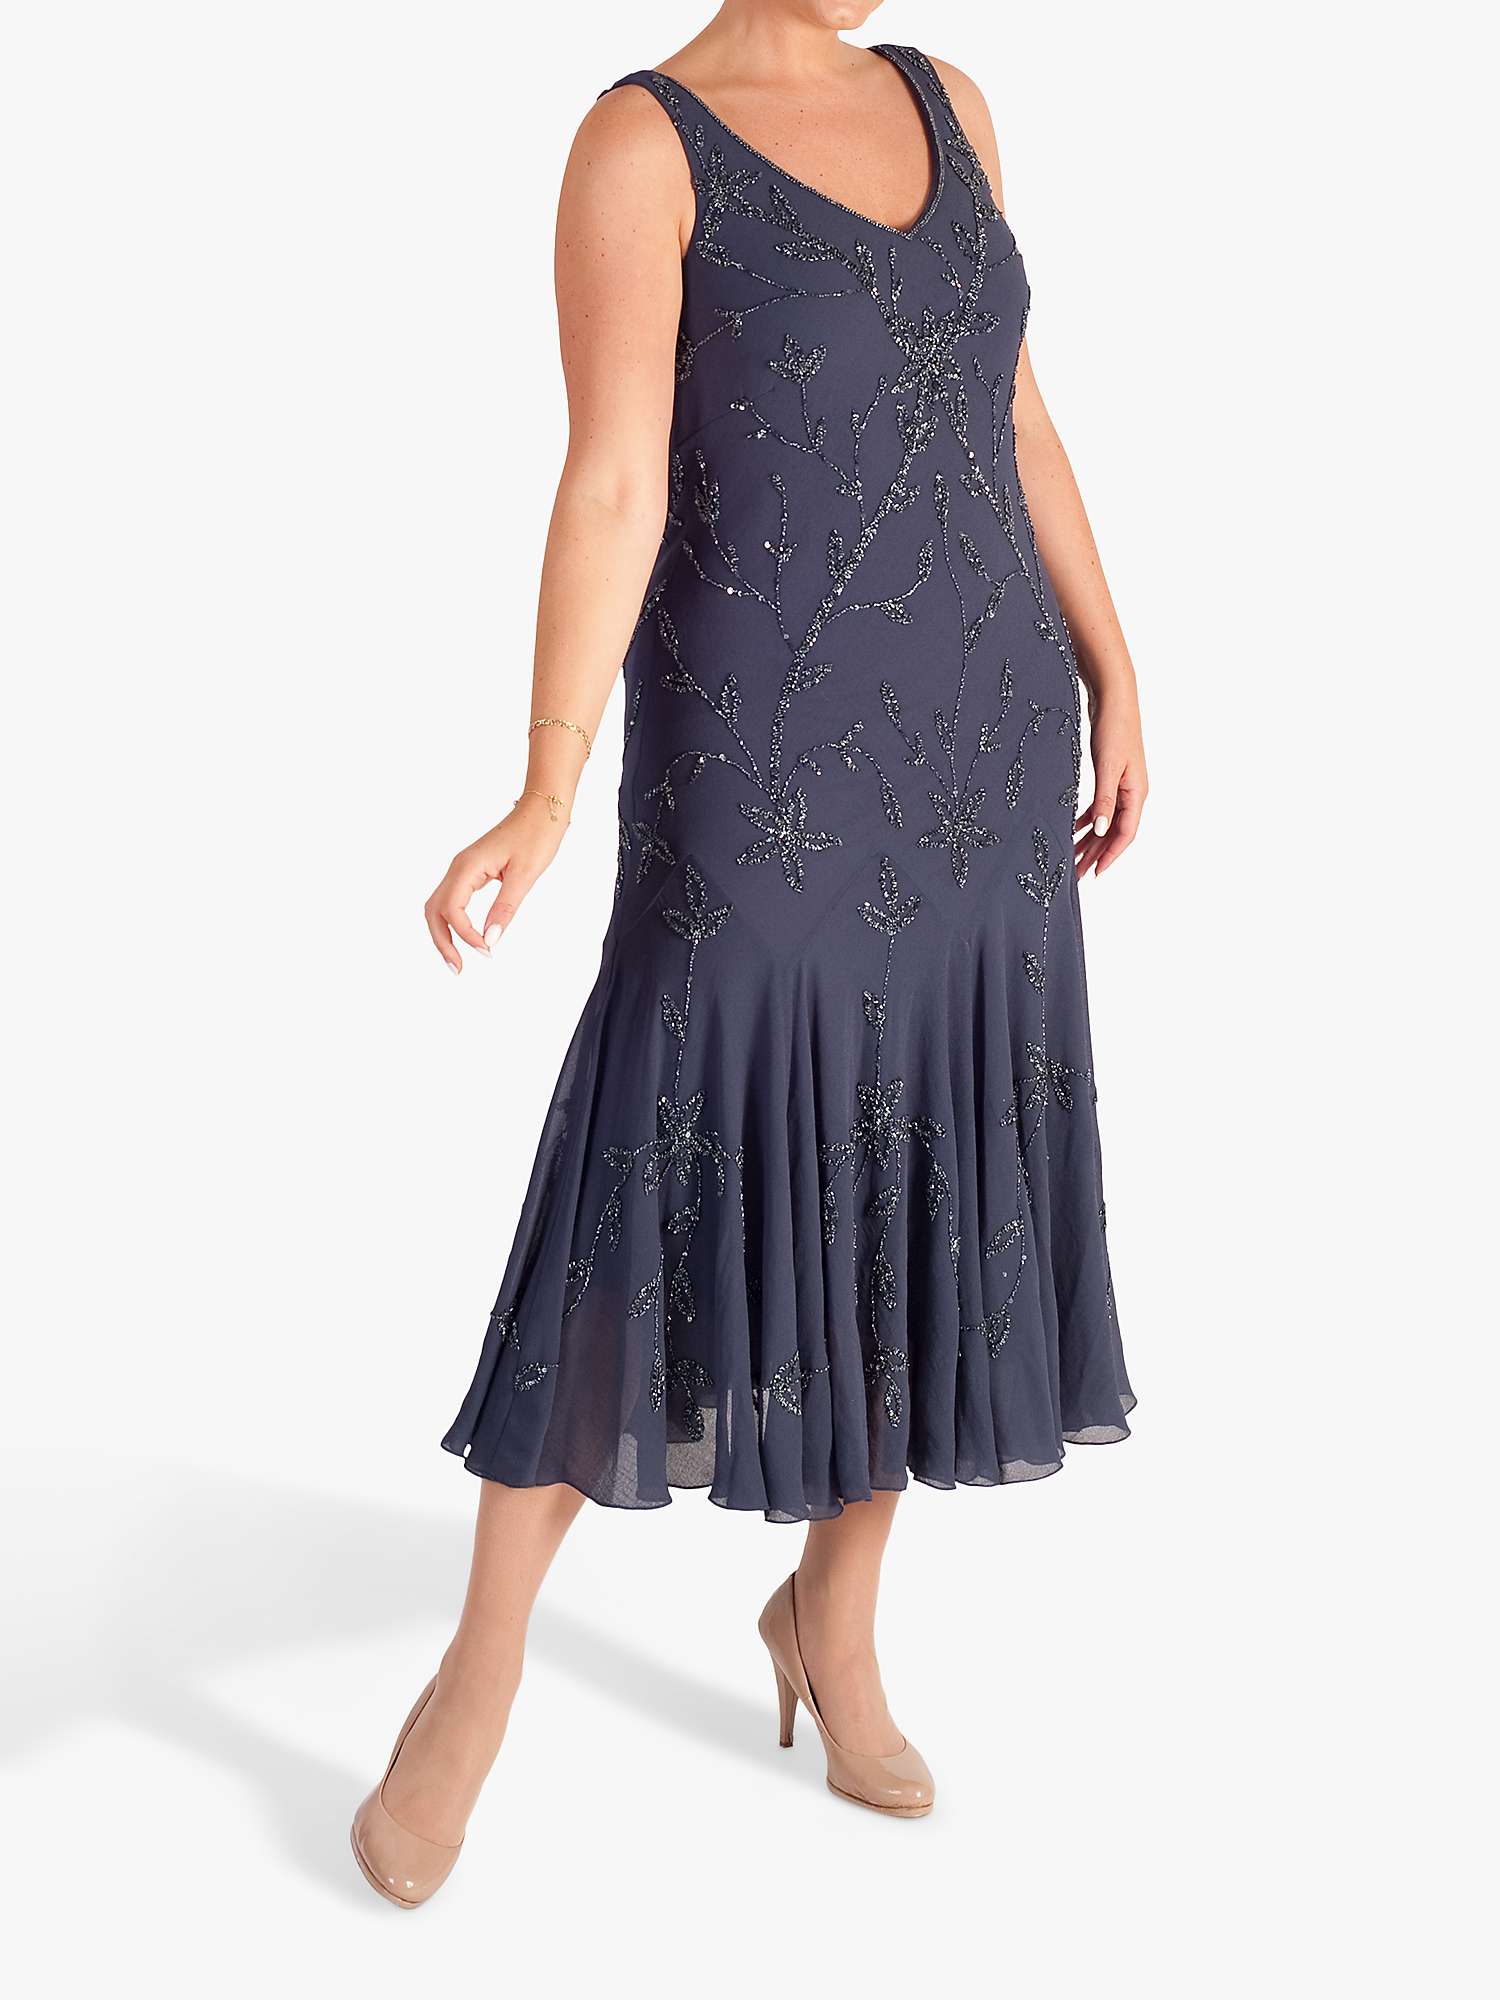 Buy chesca Floral Beaded Georgette Midi Dress, Violetta Online at johnlewis.com